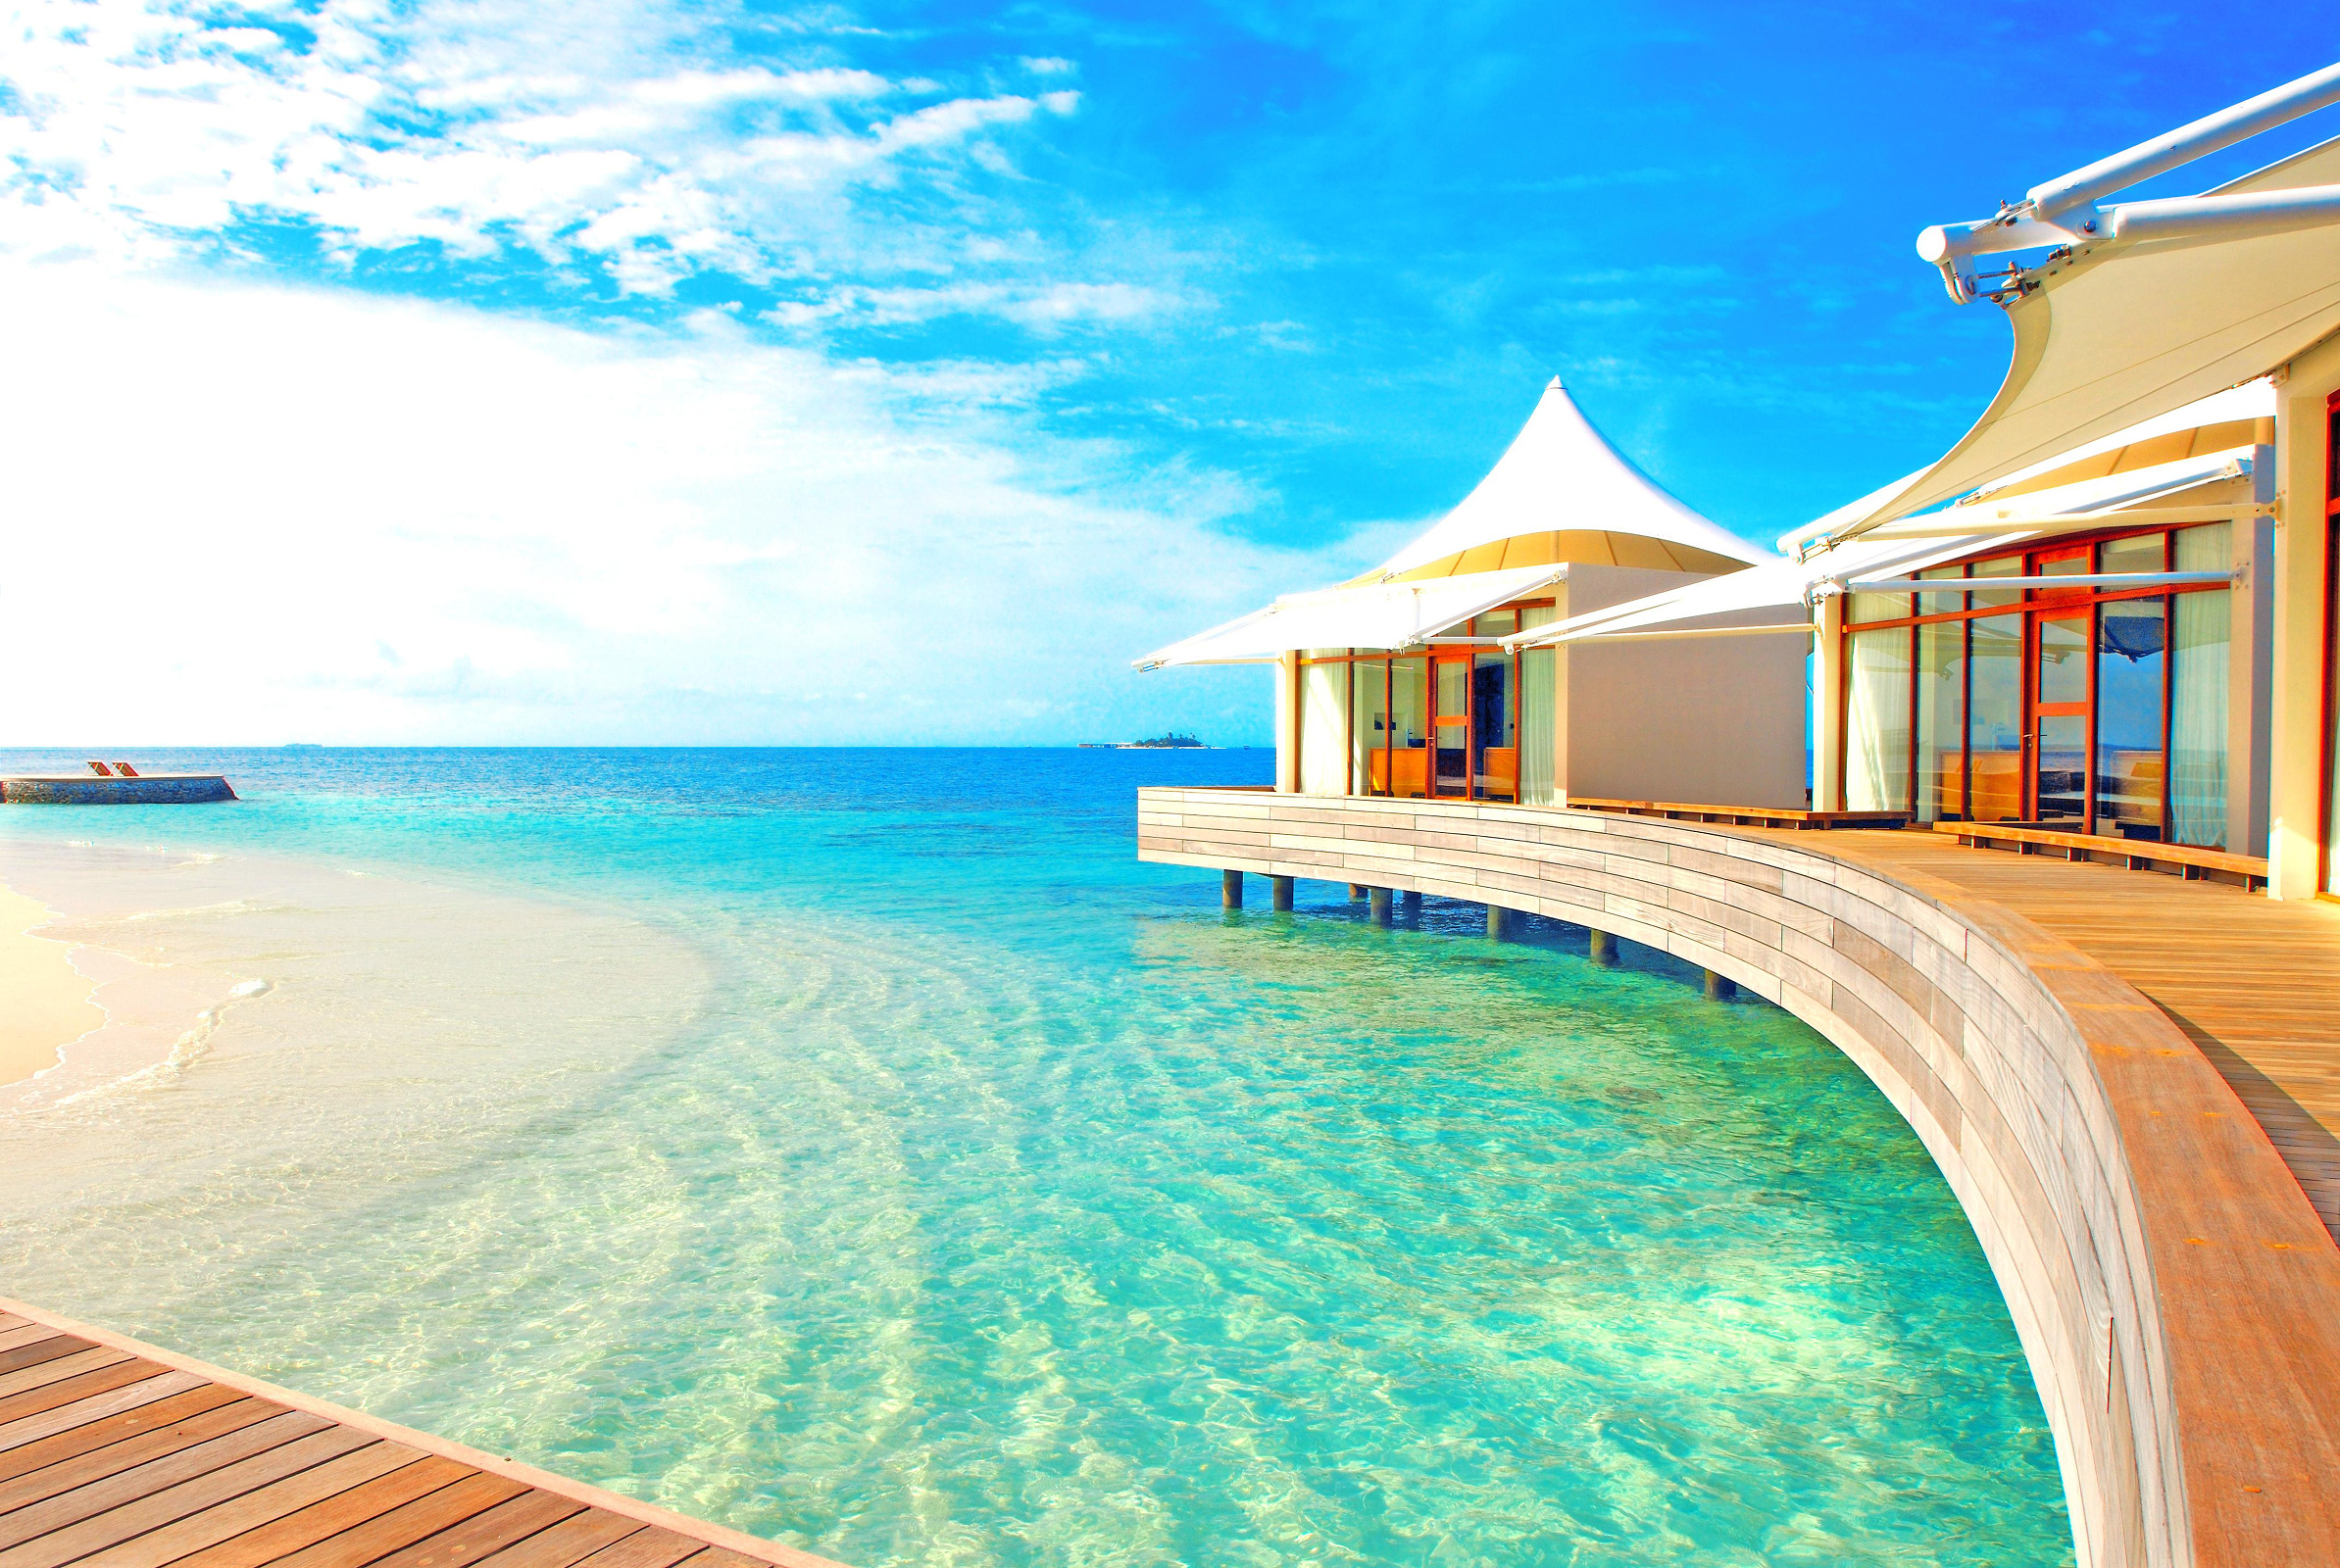 Bungalow: Overwater residence at the ocean coast, A good house for vacation, Crystal-clean water. 2390x1600 HD Background.